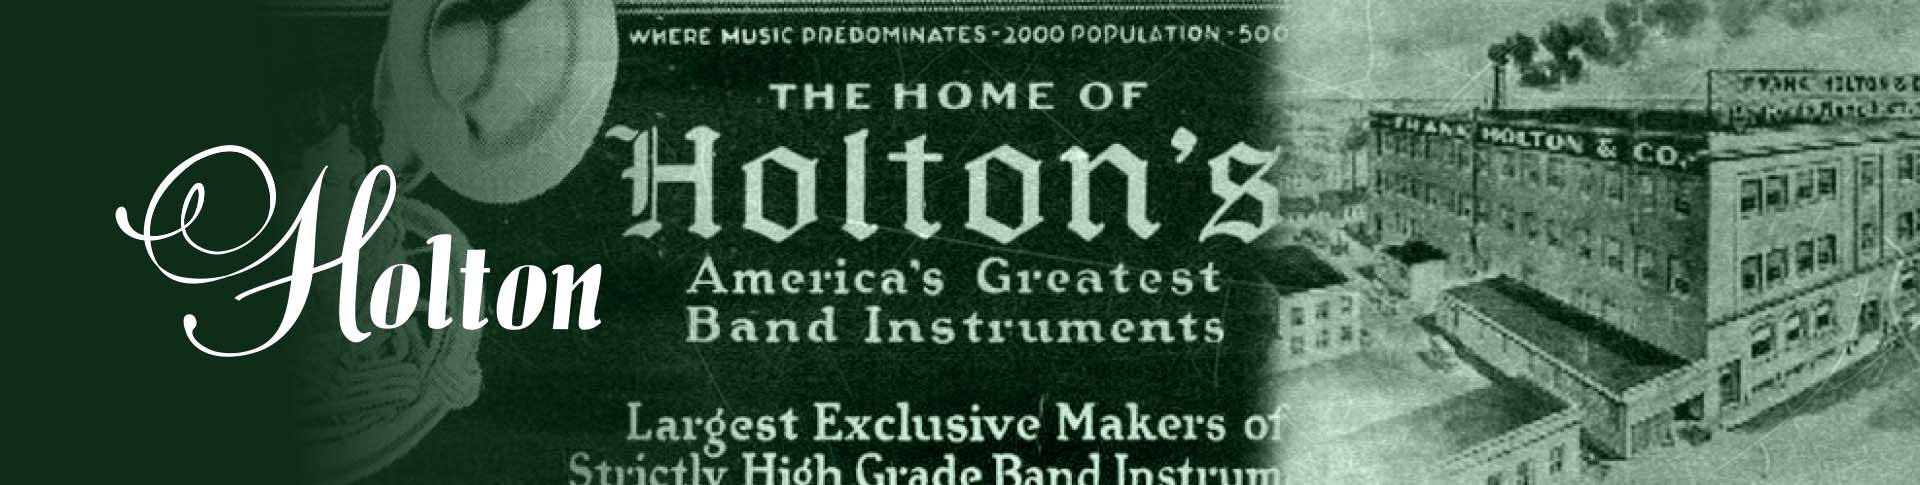 Holton Horn Logo with an old advertisement